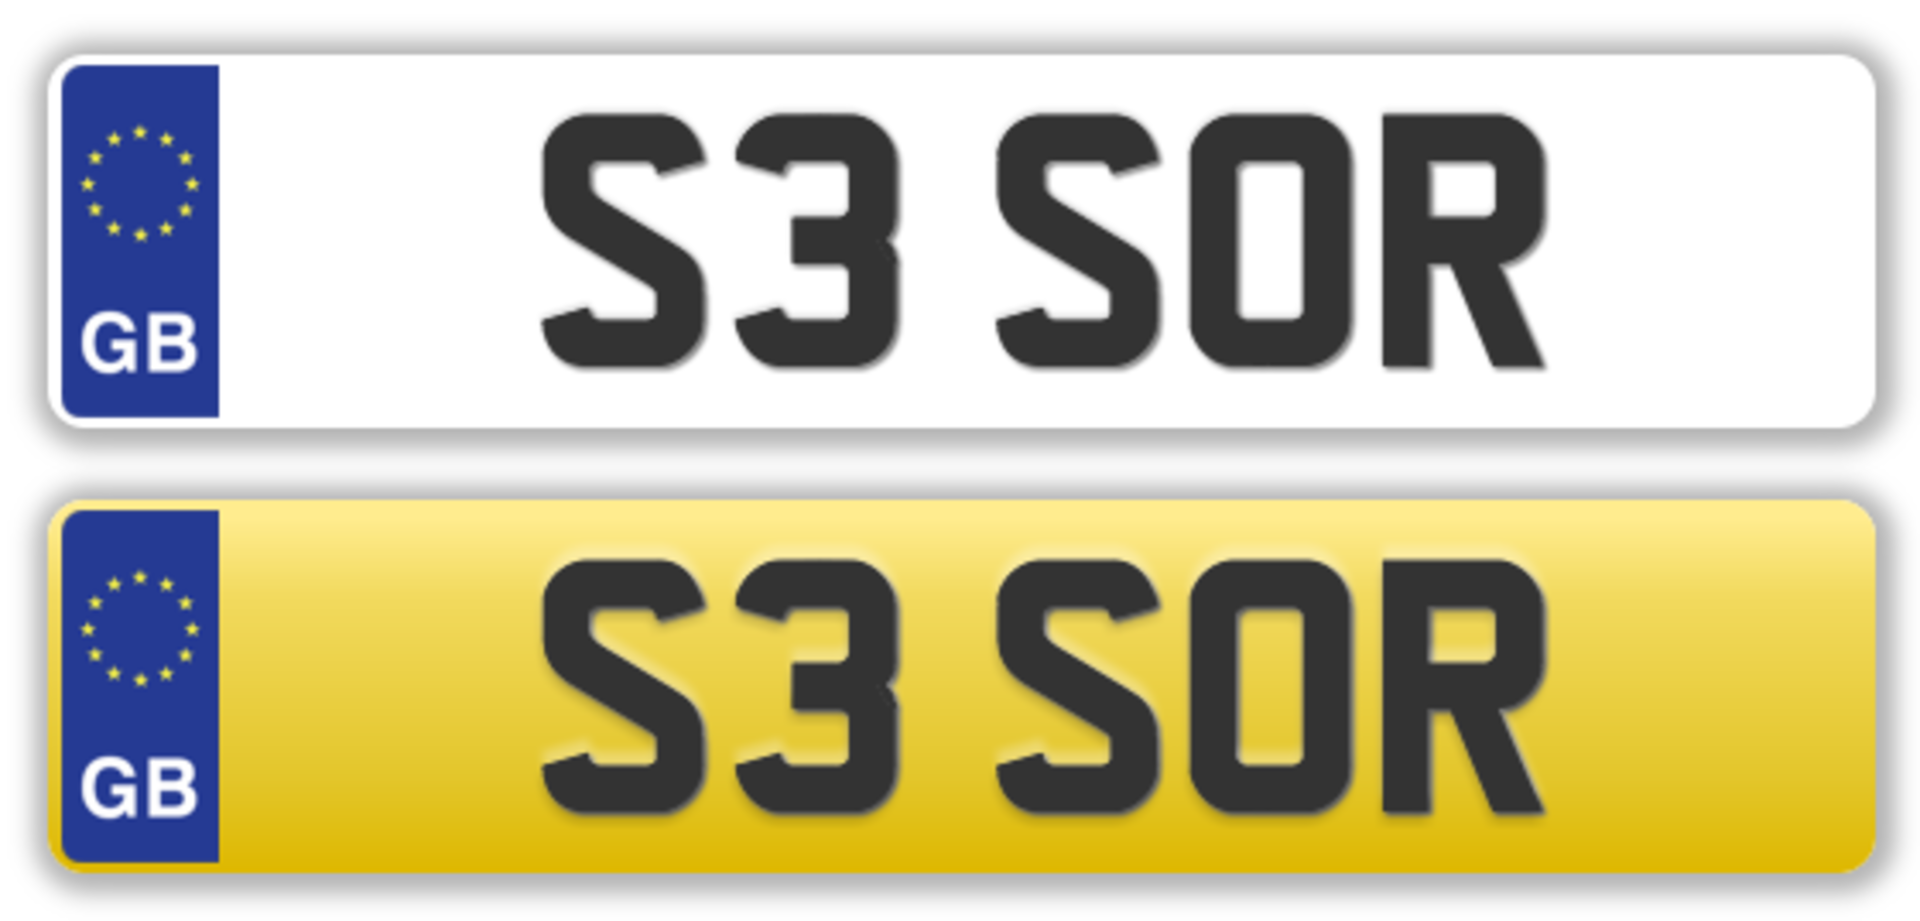 Cherished Plate - S3 SOR - No transfer fees. All registrations on retention and ready to transfer.